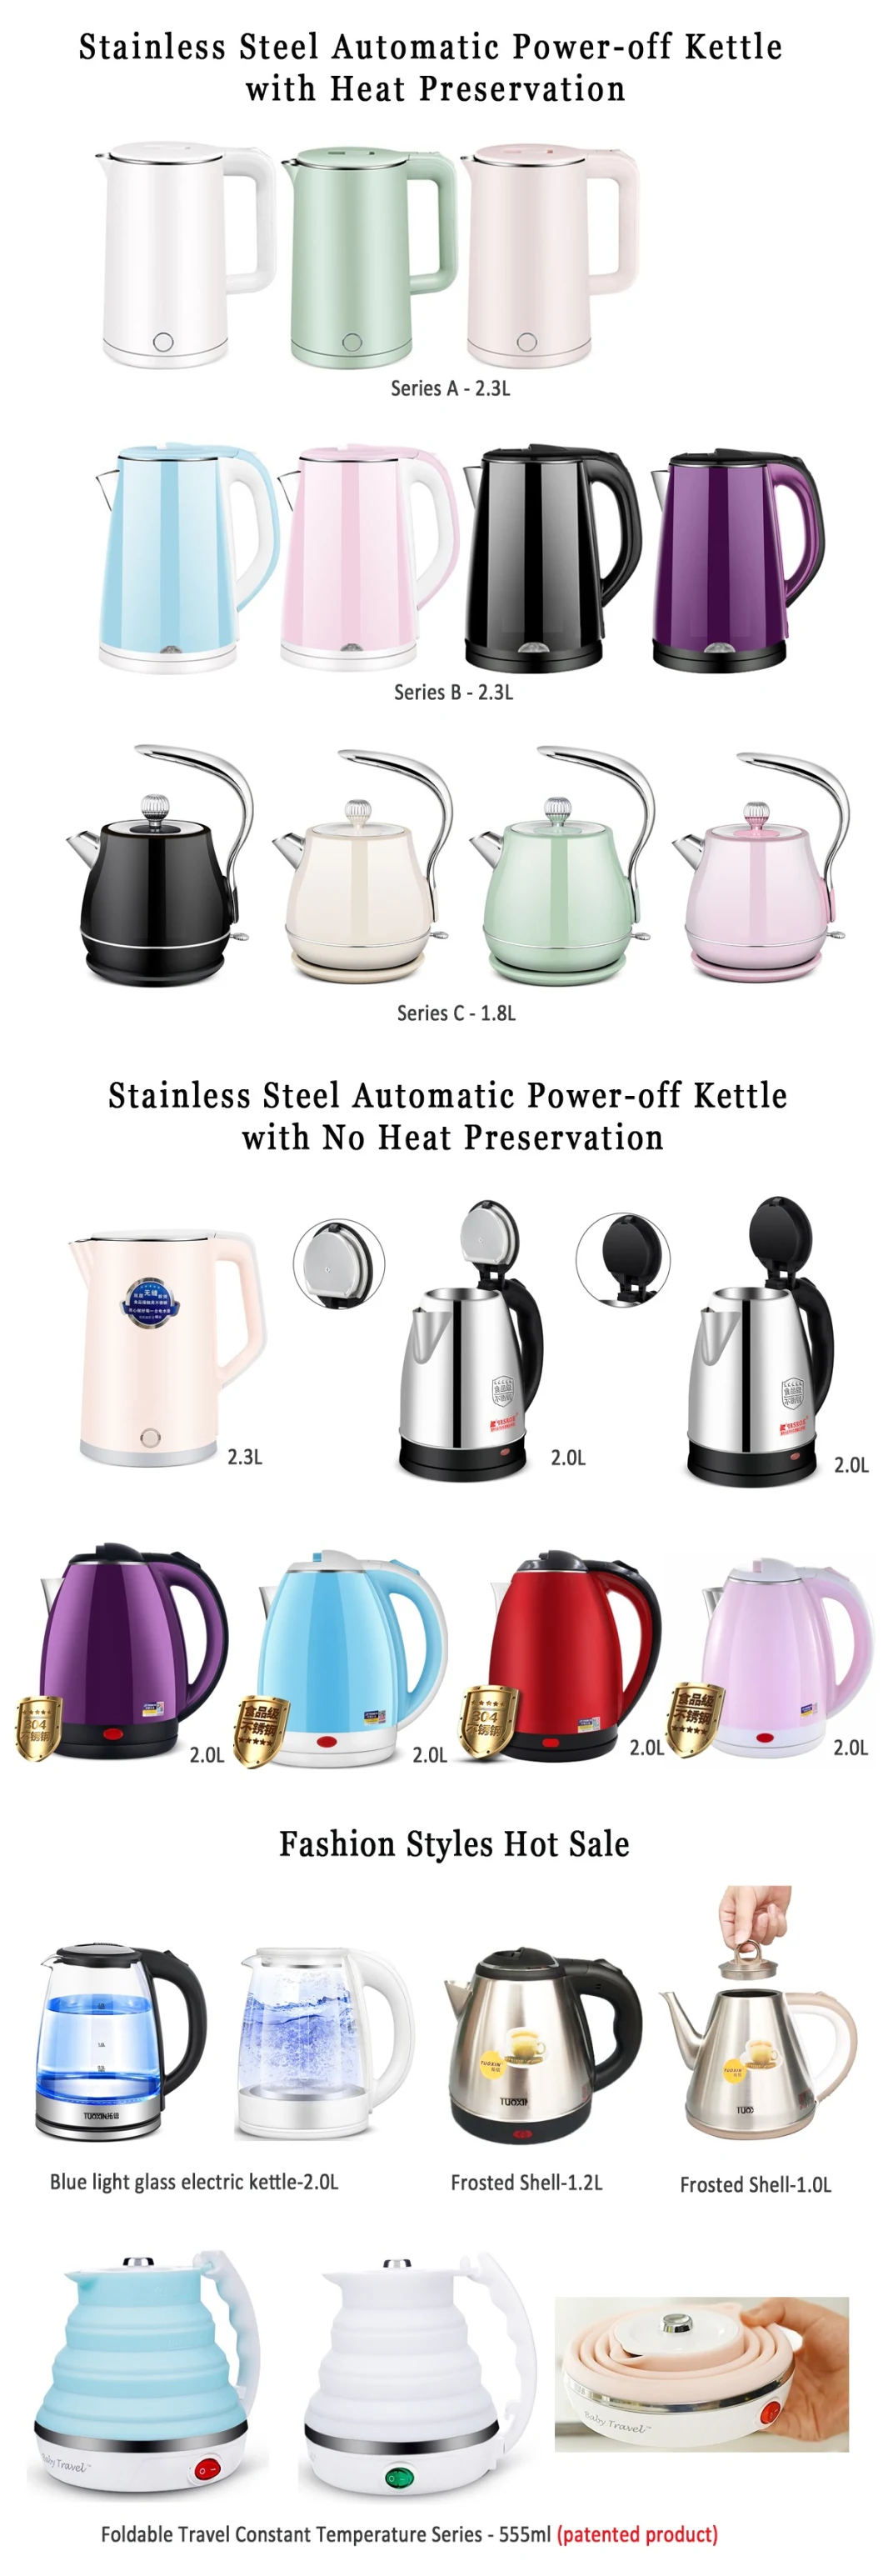 Fashion Thermal Heat Insulation Preservation Automatic Power off Electric Kettle with Large Capacity Logo Printing